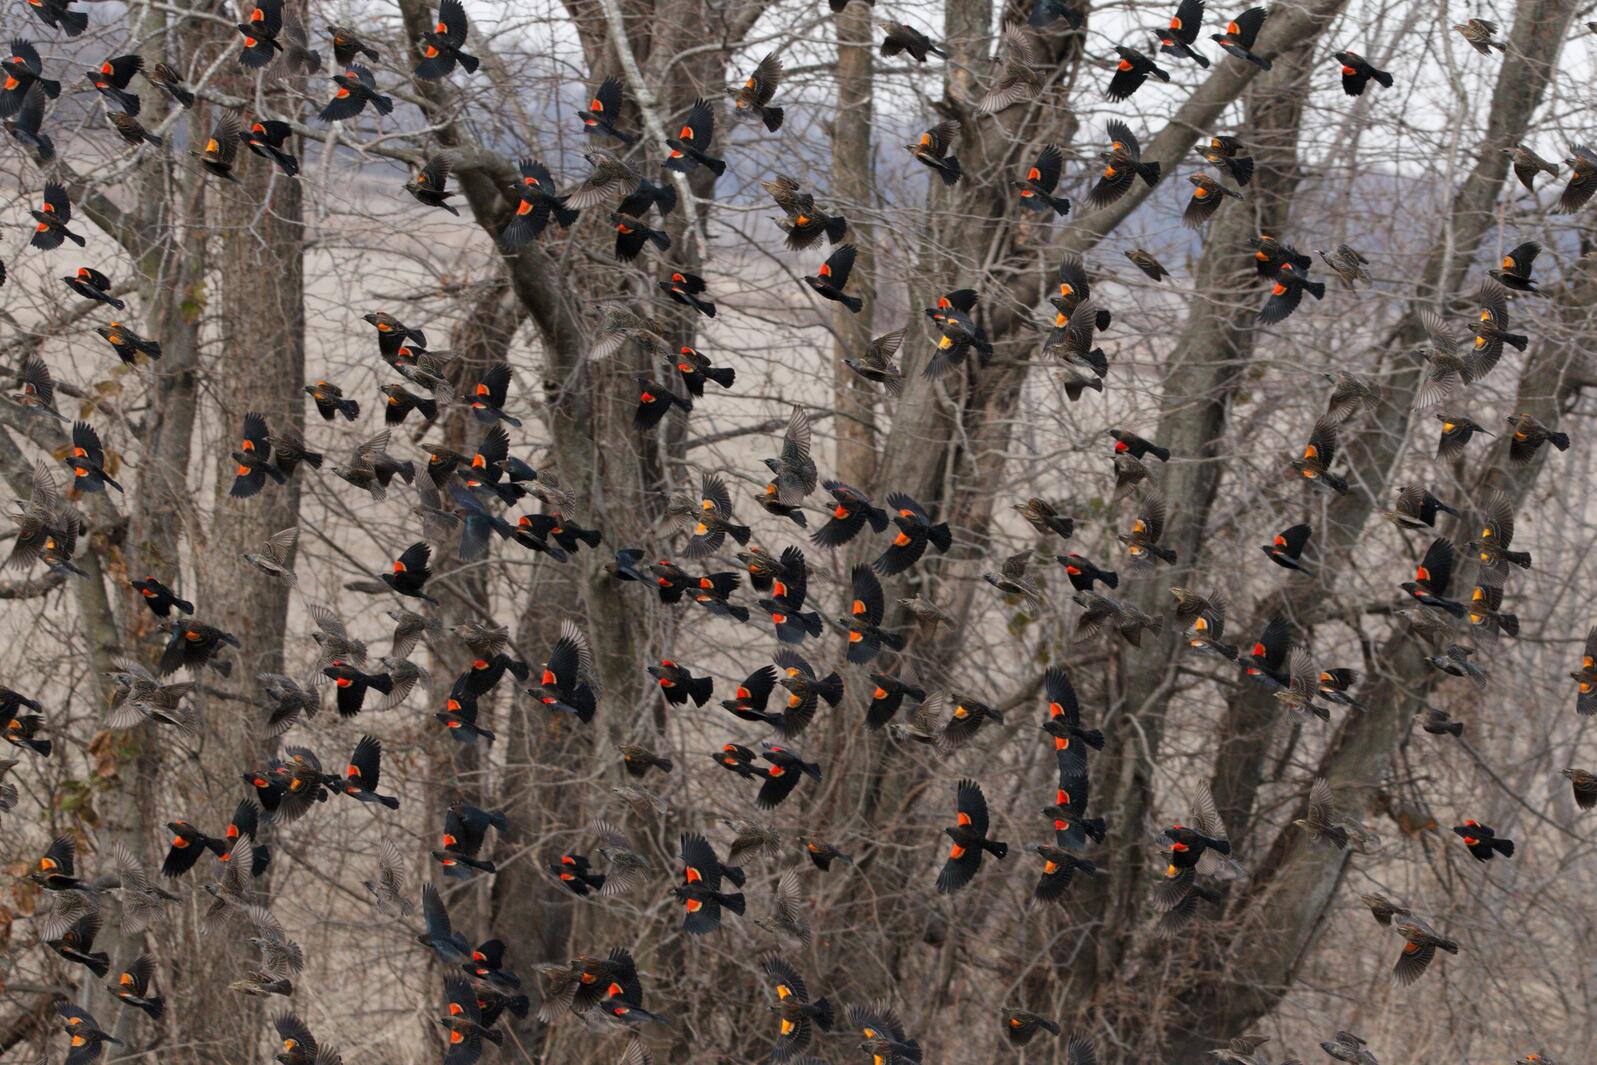 about a hundred black birds with flashy red triangles on their extended wings flying in the same direction as a flock. Being the blackbirds are large and bare trees.